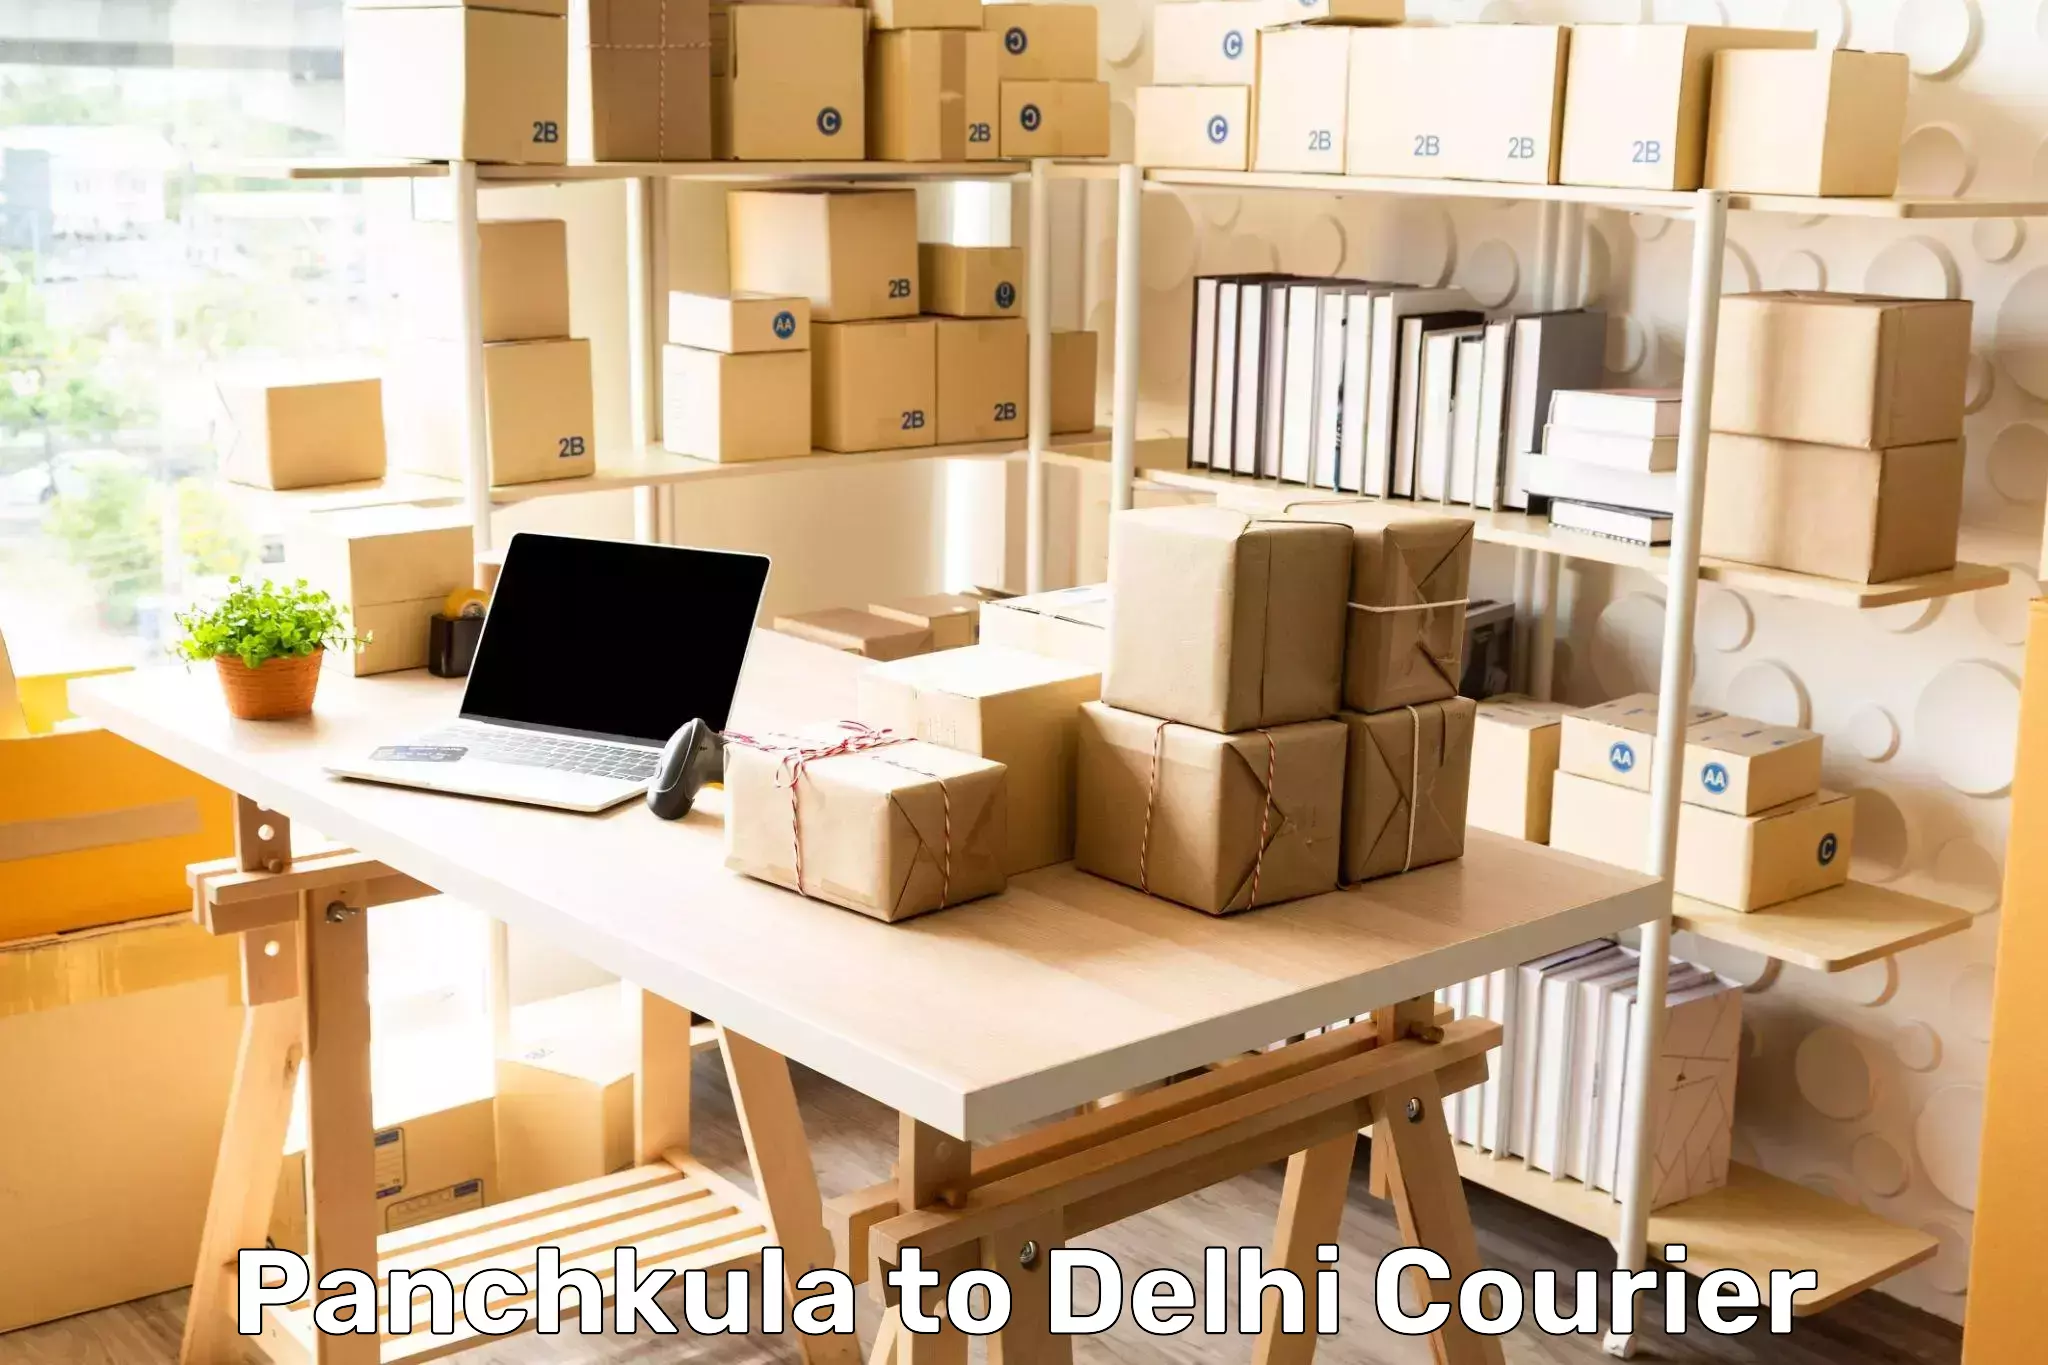 Same-day delivery solutions Panchkula to IIT Delhi